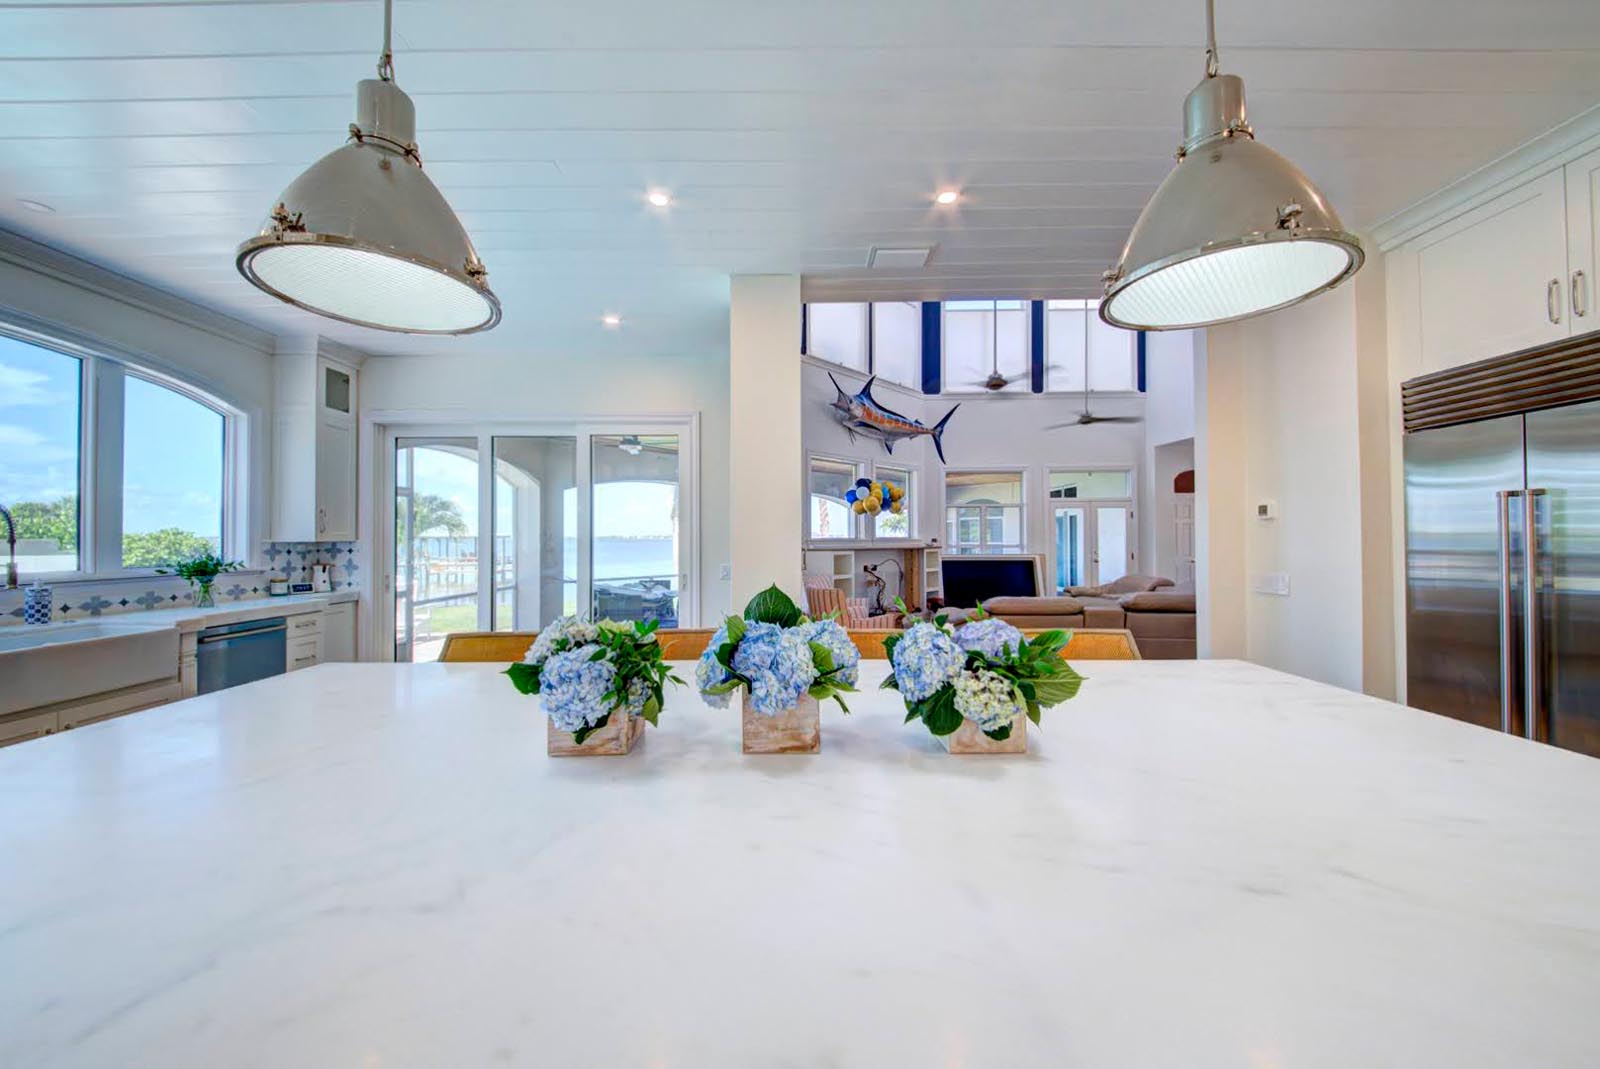 Beautiful ocean inspired kitchen and bathroom design and installation in Melbourne by Hammond Kitchens and Bath